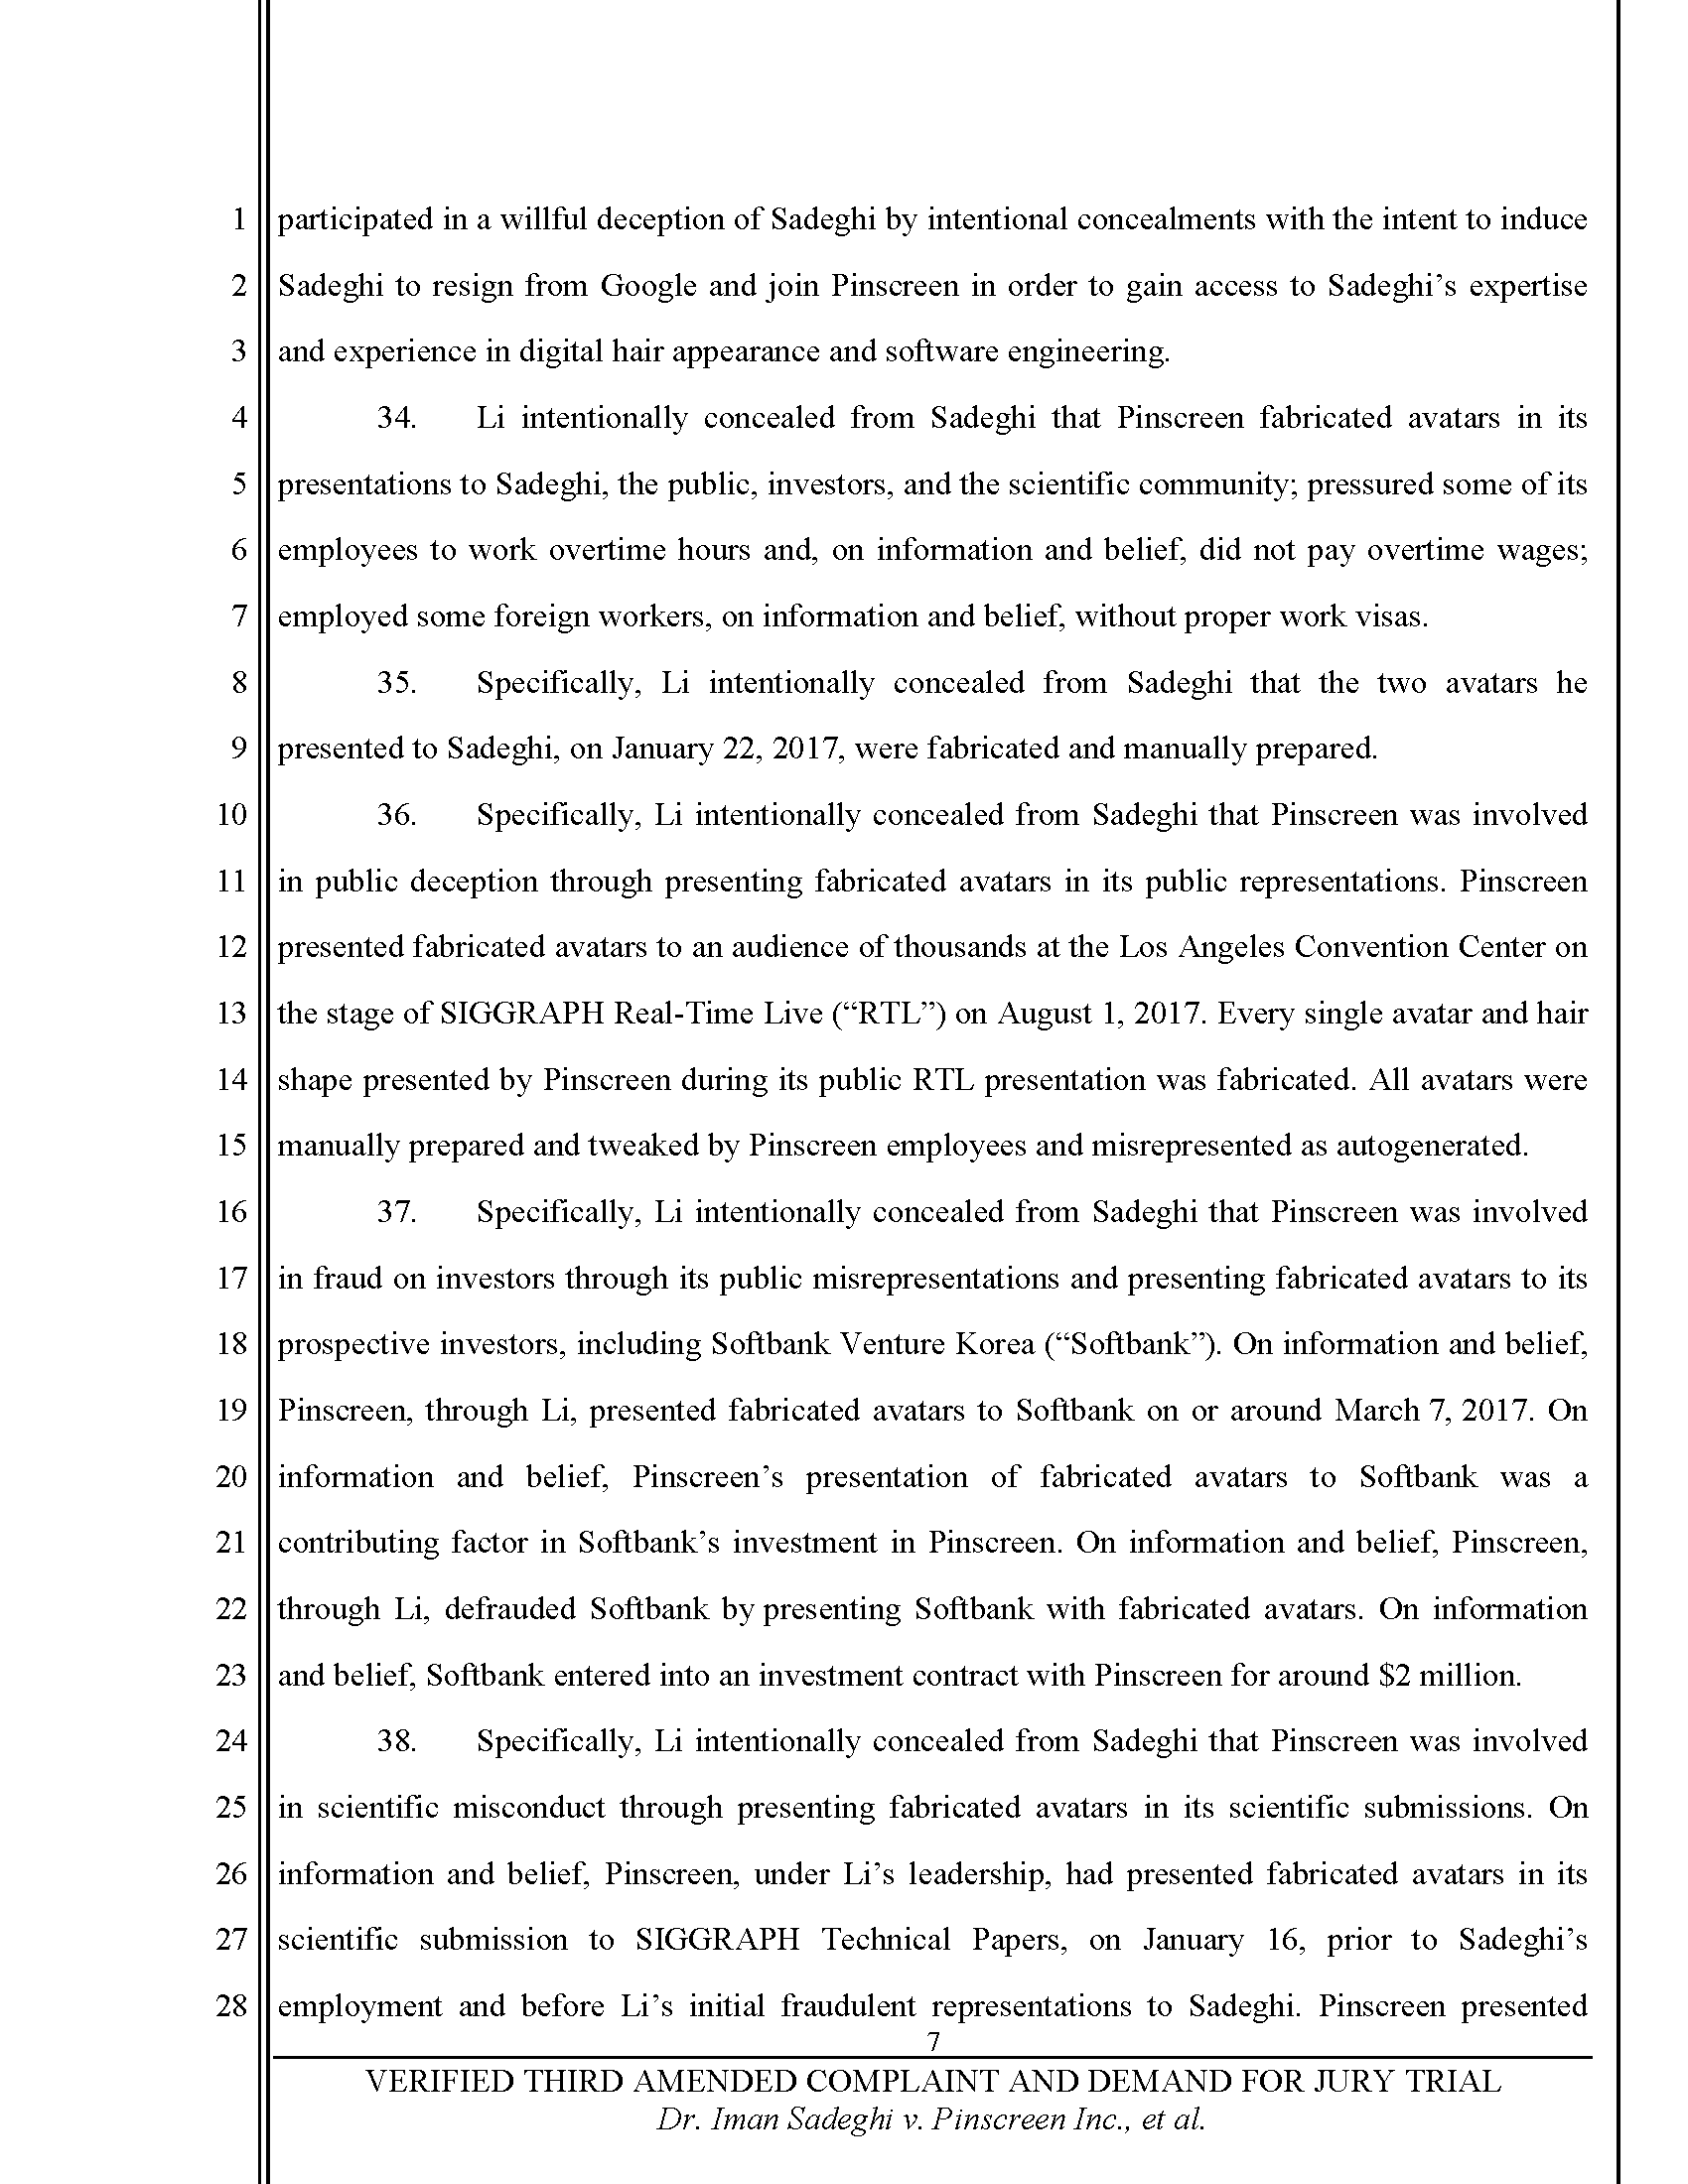 Third Amended Complaint (TAC) Page 8